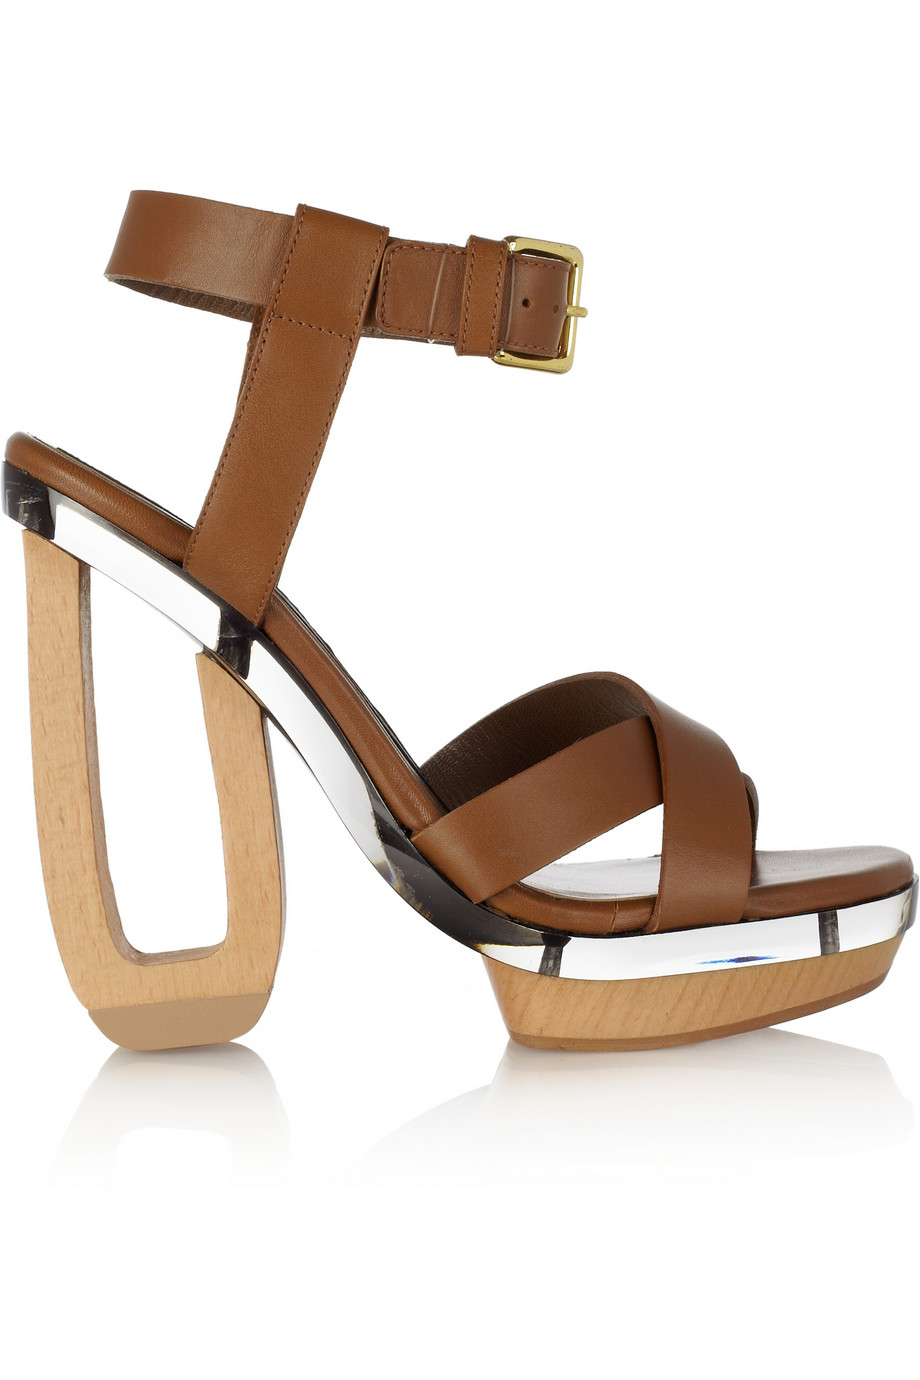 MARNI Leather, wood and perspex sandals